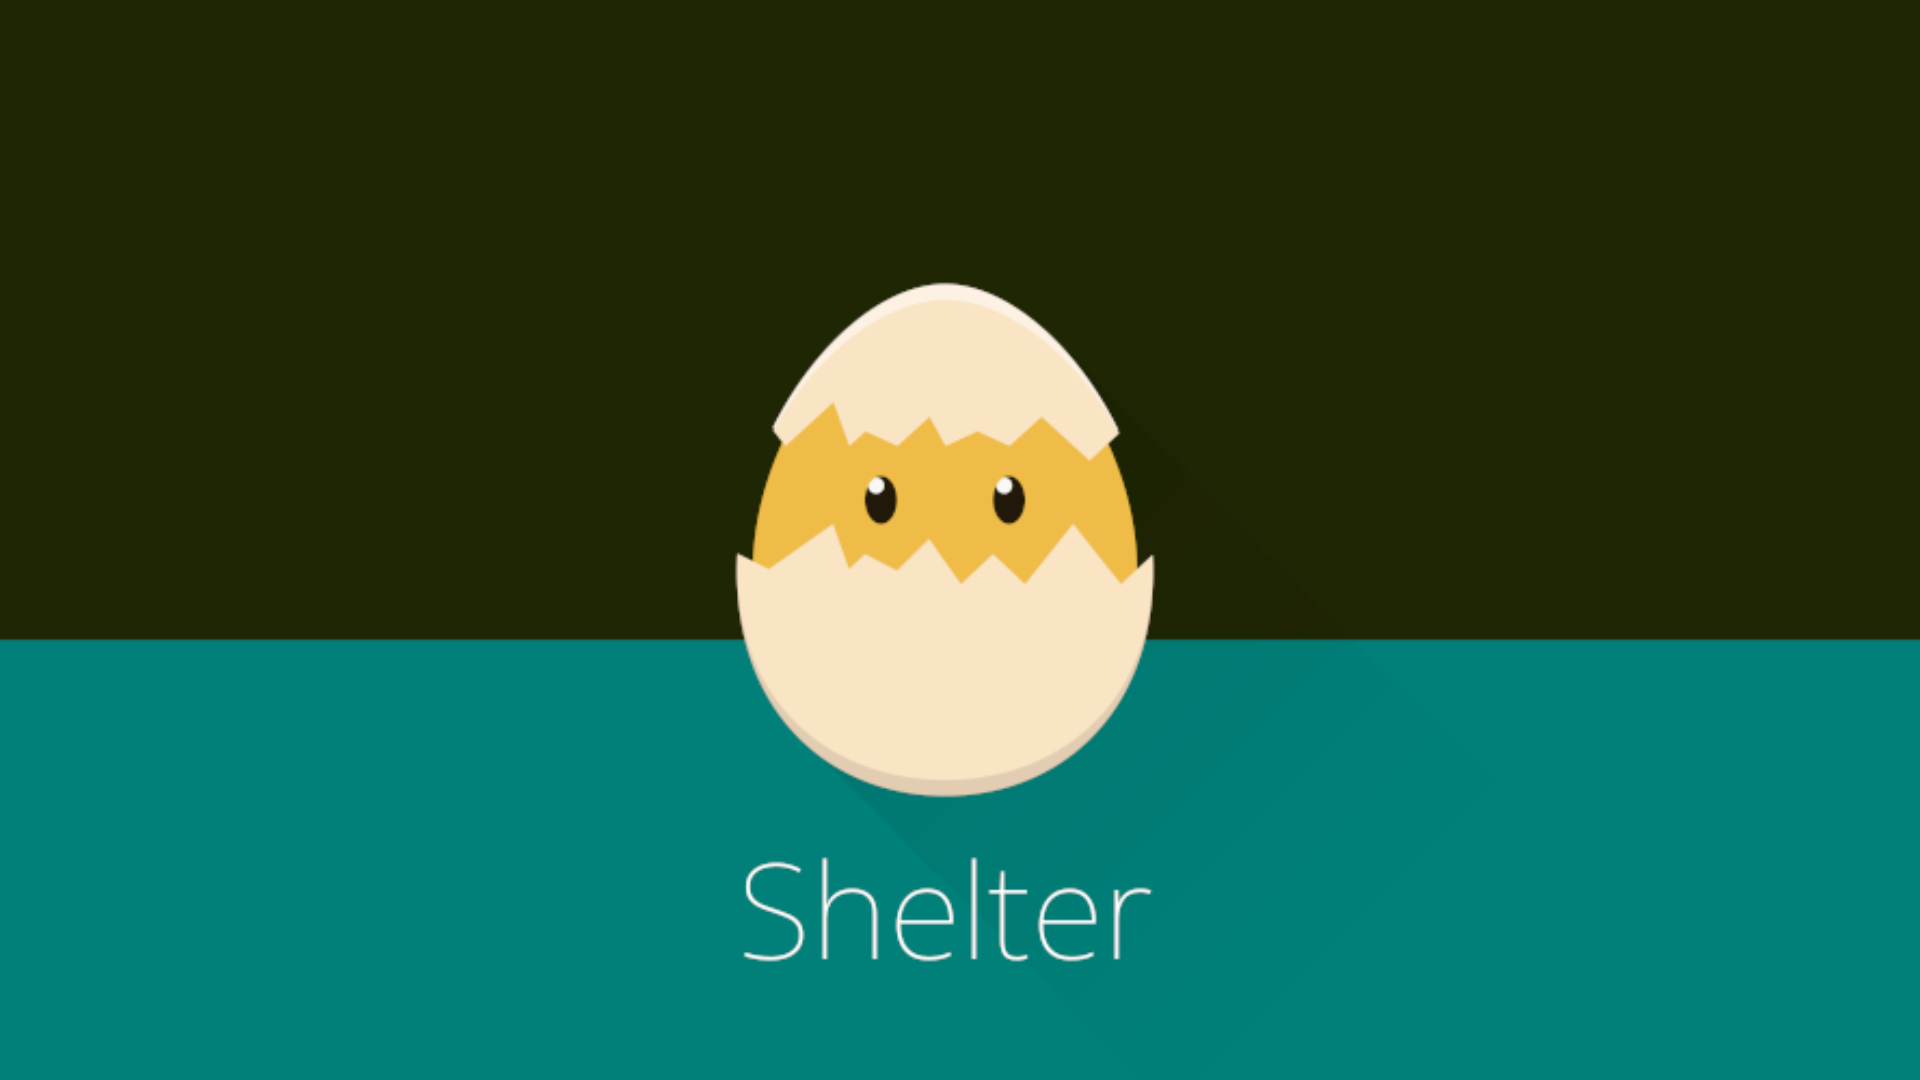 How to Download Shelter Latest Version on Android